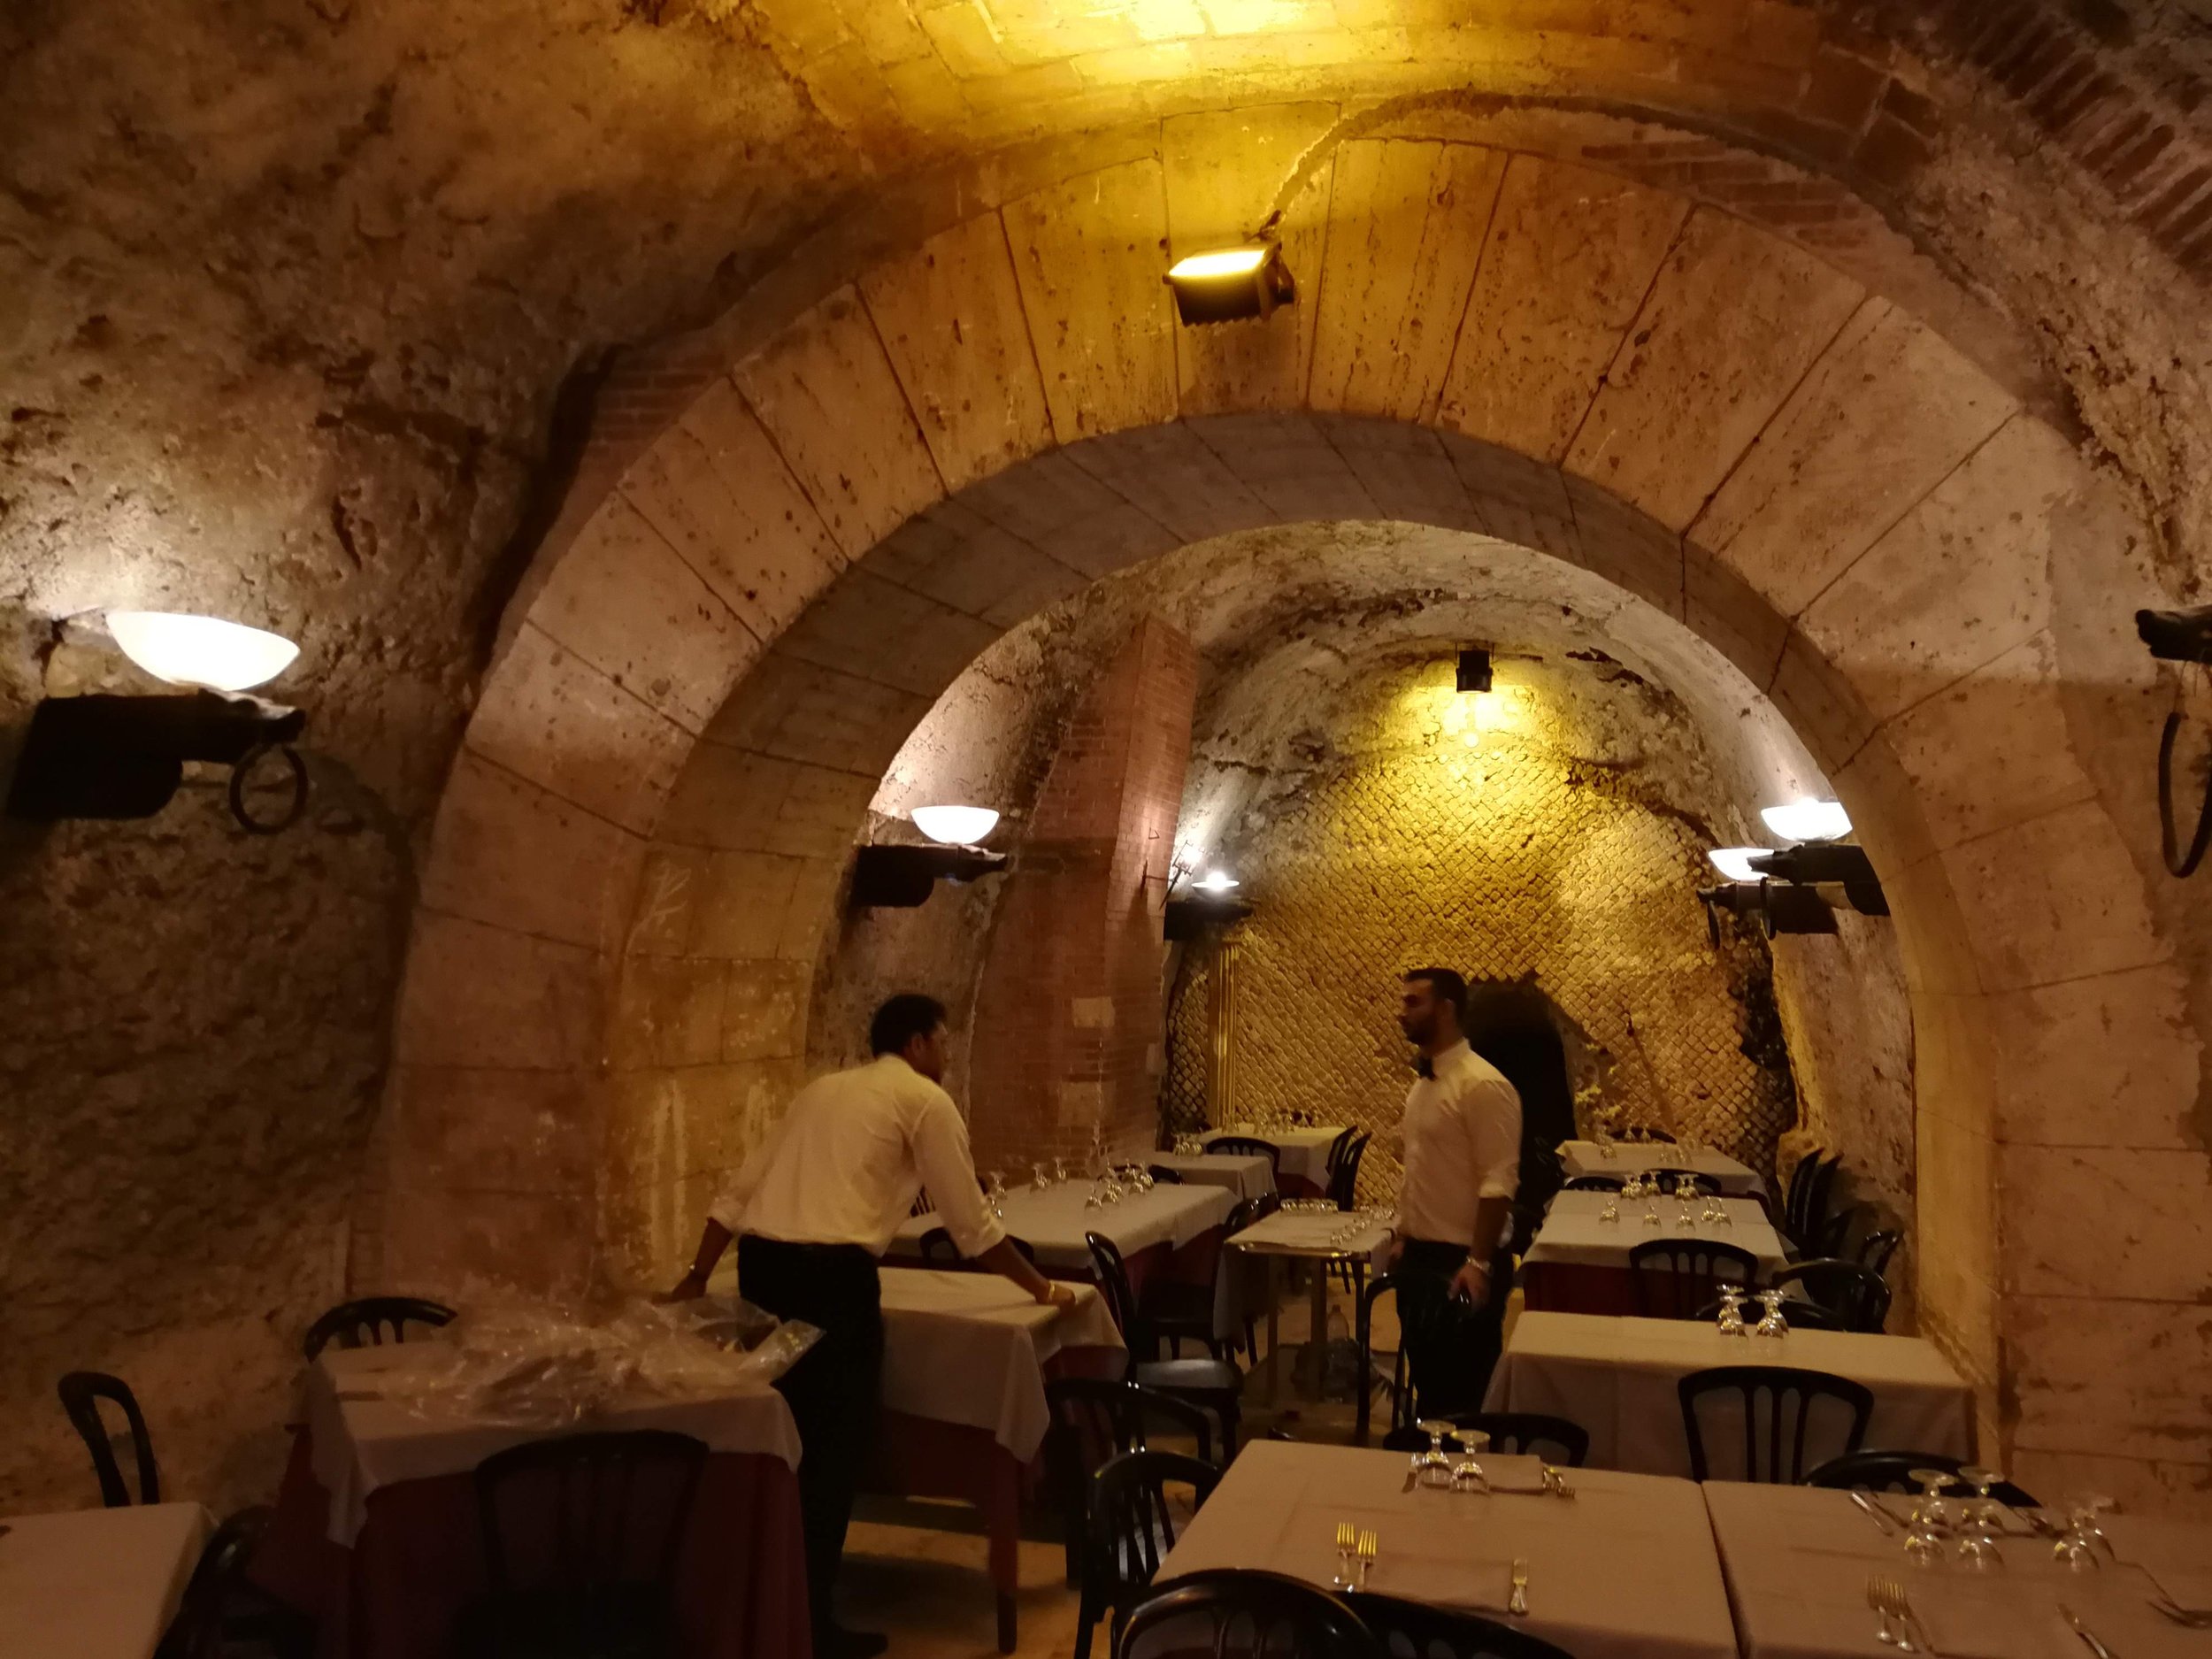 The Ultimate Guide To Rome For Foodies 2023 — Chef Denise